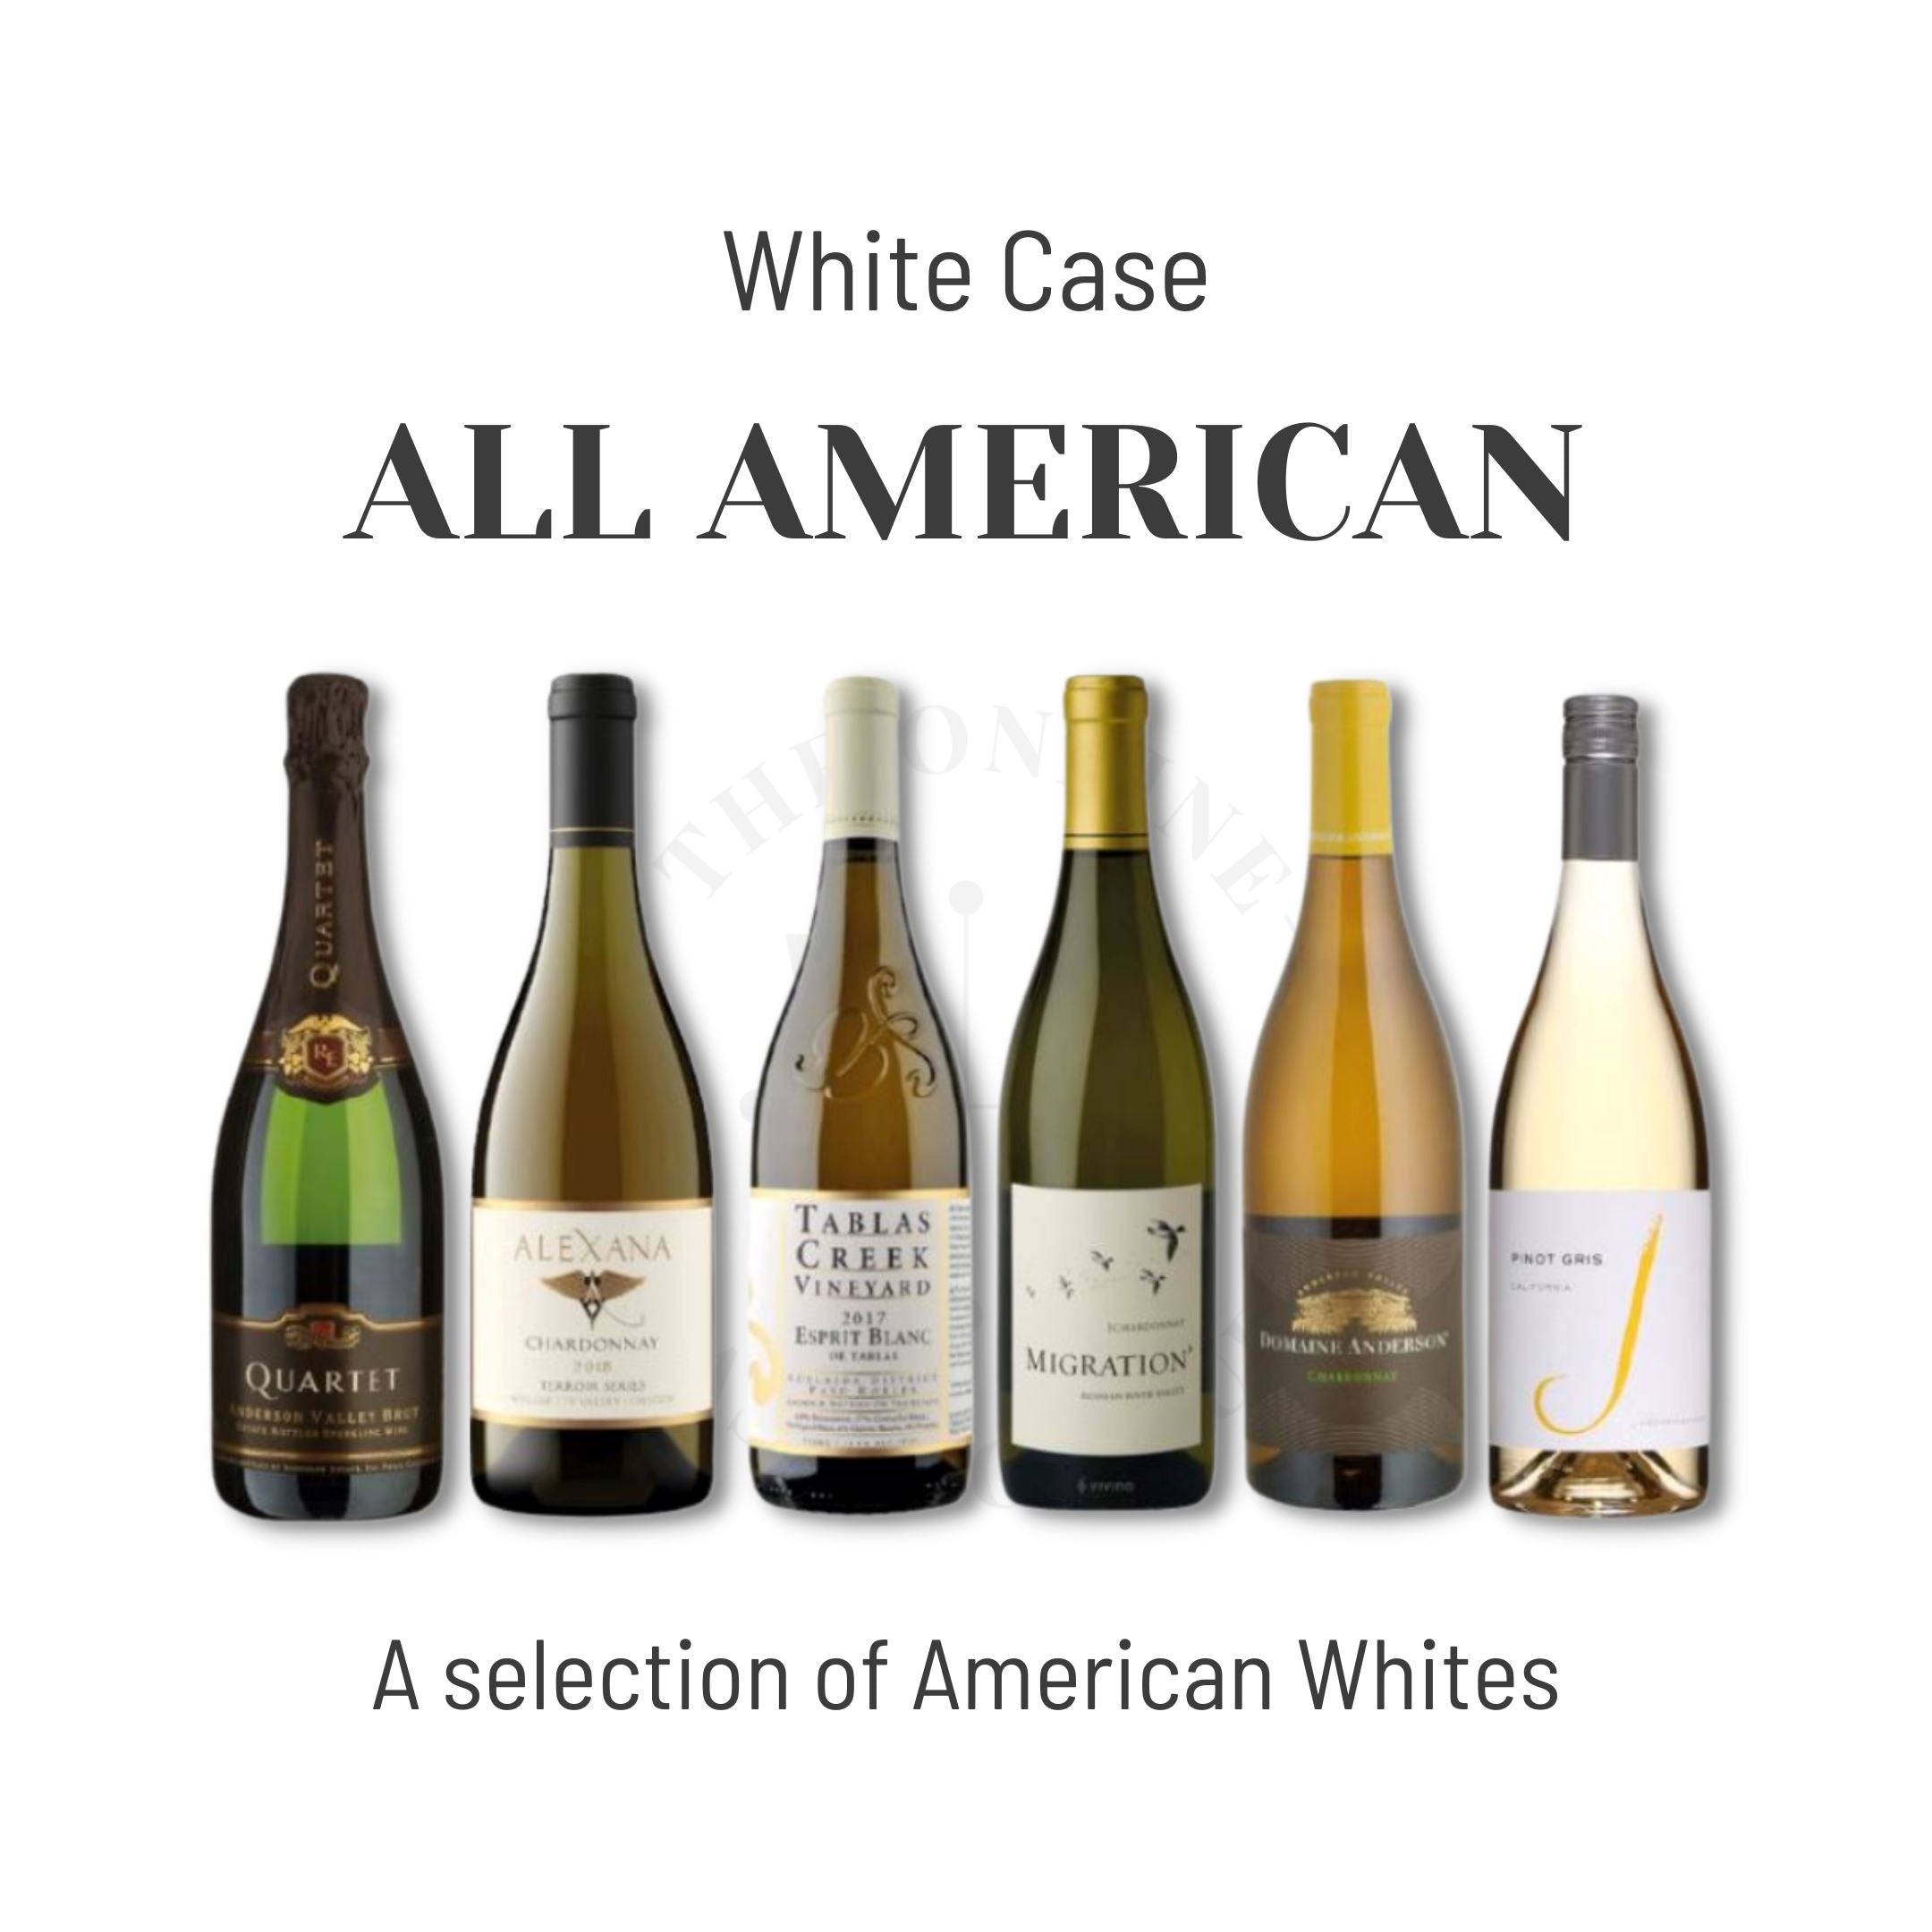 All American Whites Wine Cases The Online Wine Tasting Club 